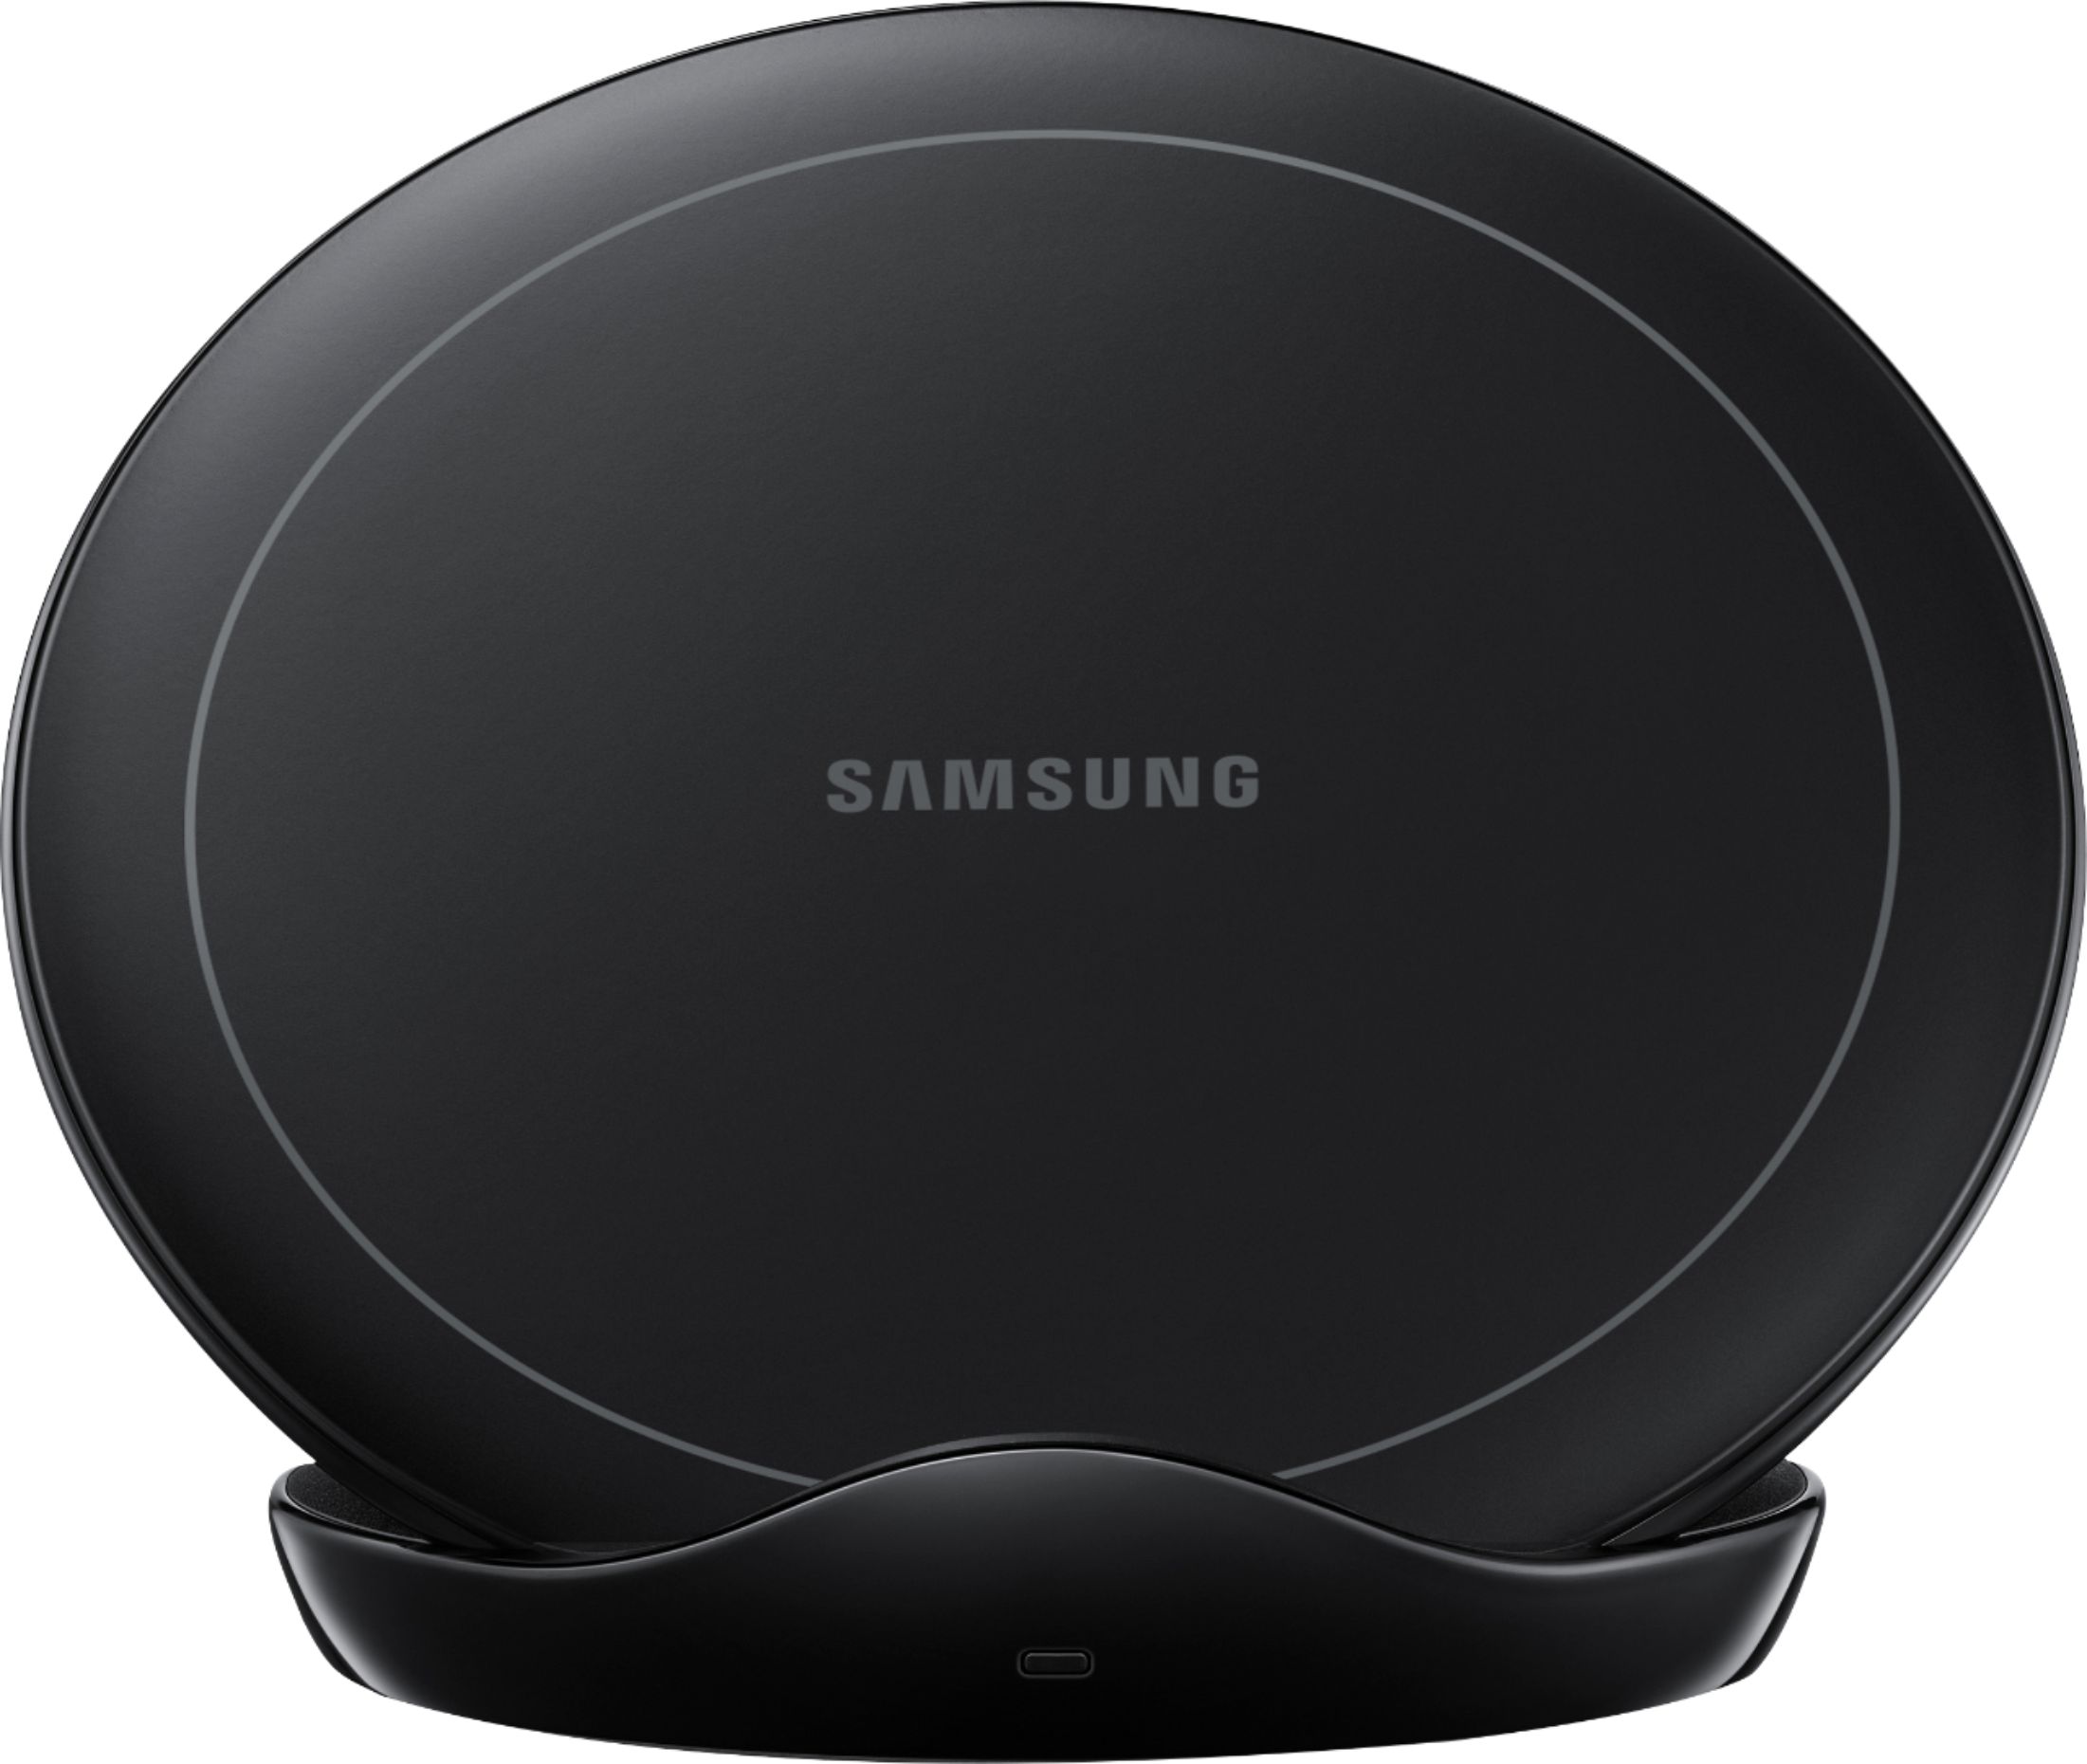 Official Samsung Galaxy Convertible Wireless 9W Fast Charger - Black